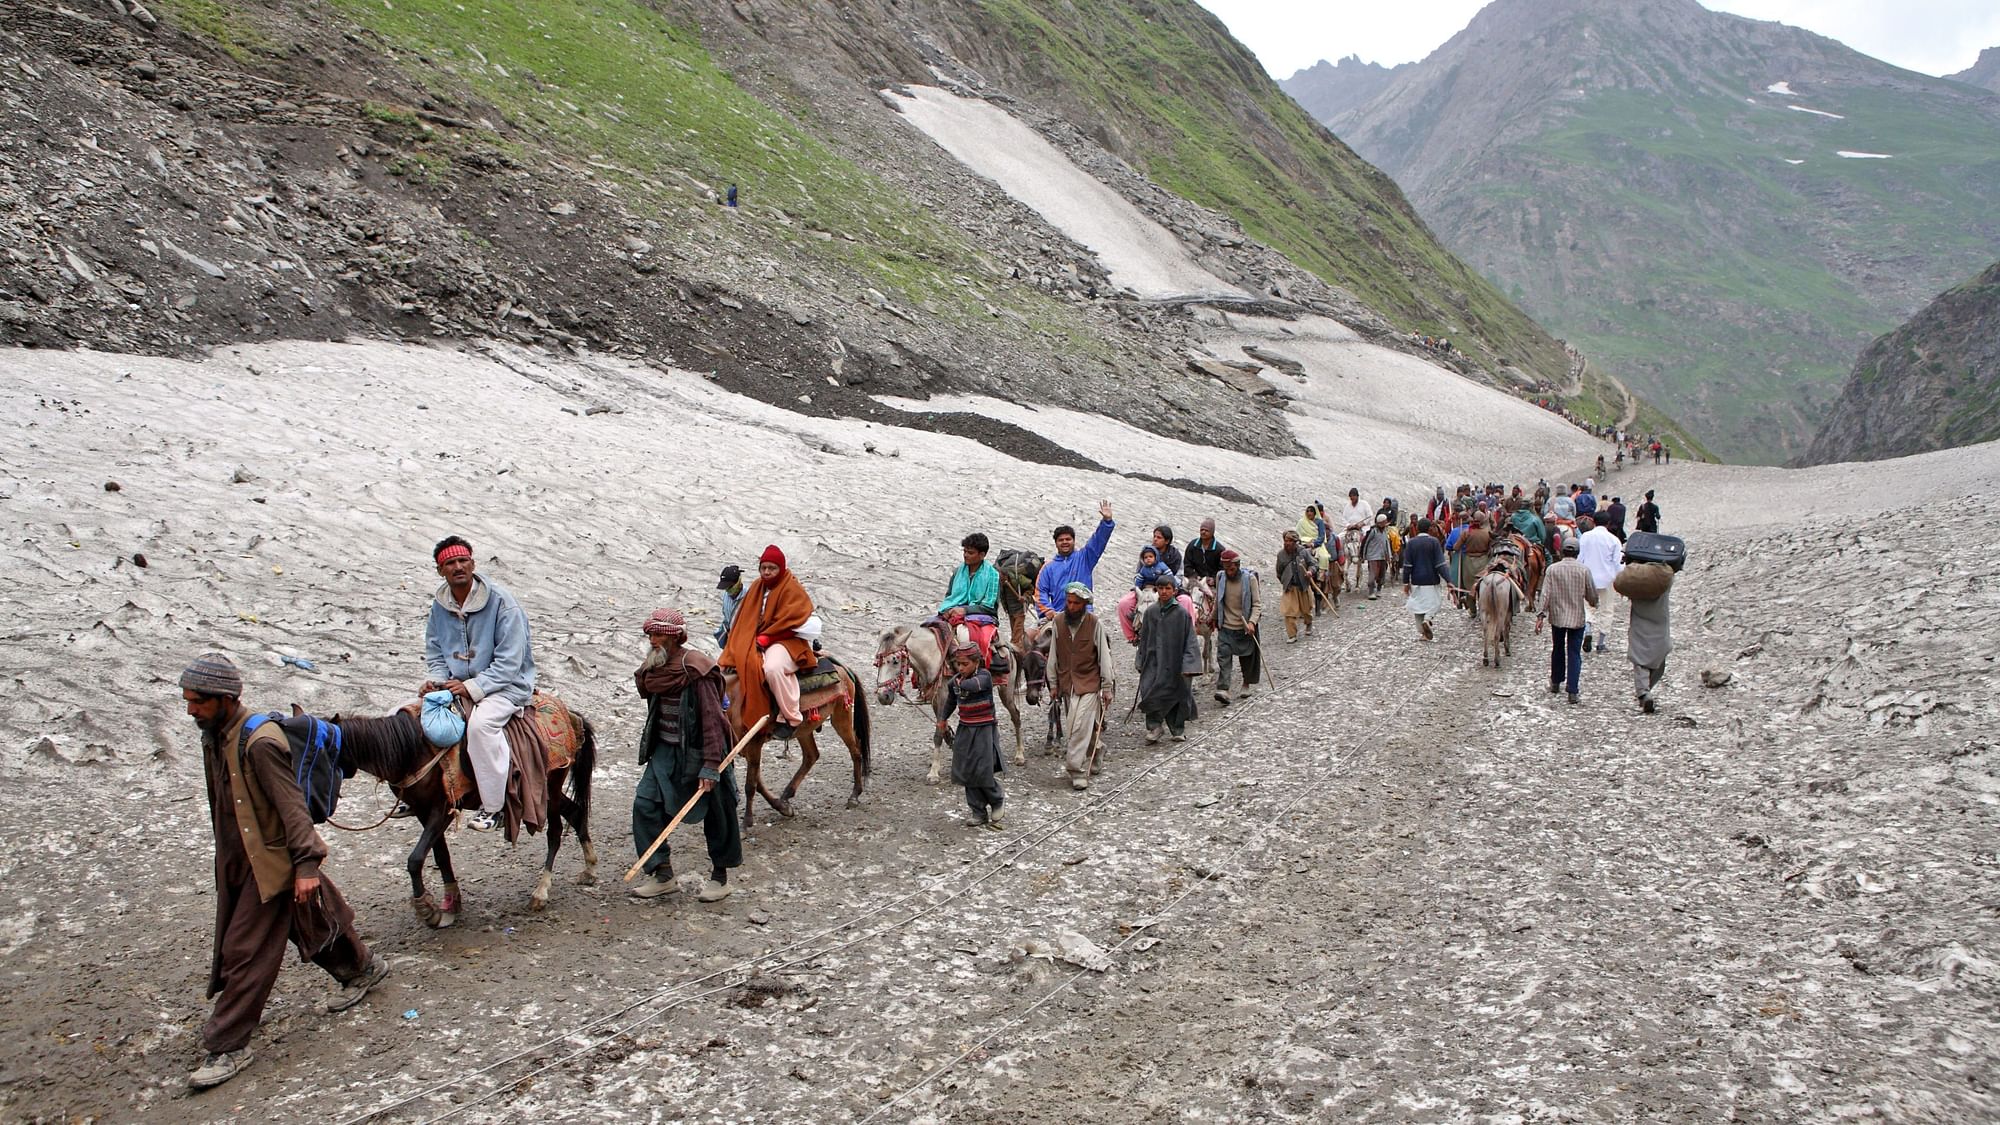 Amarnath Yatra 2019: All you need to know before going on the Amarnath Yatra.